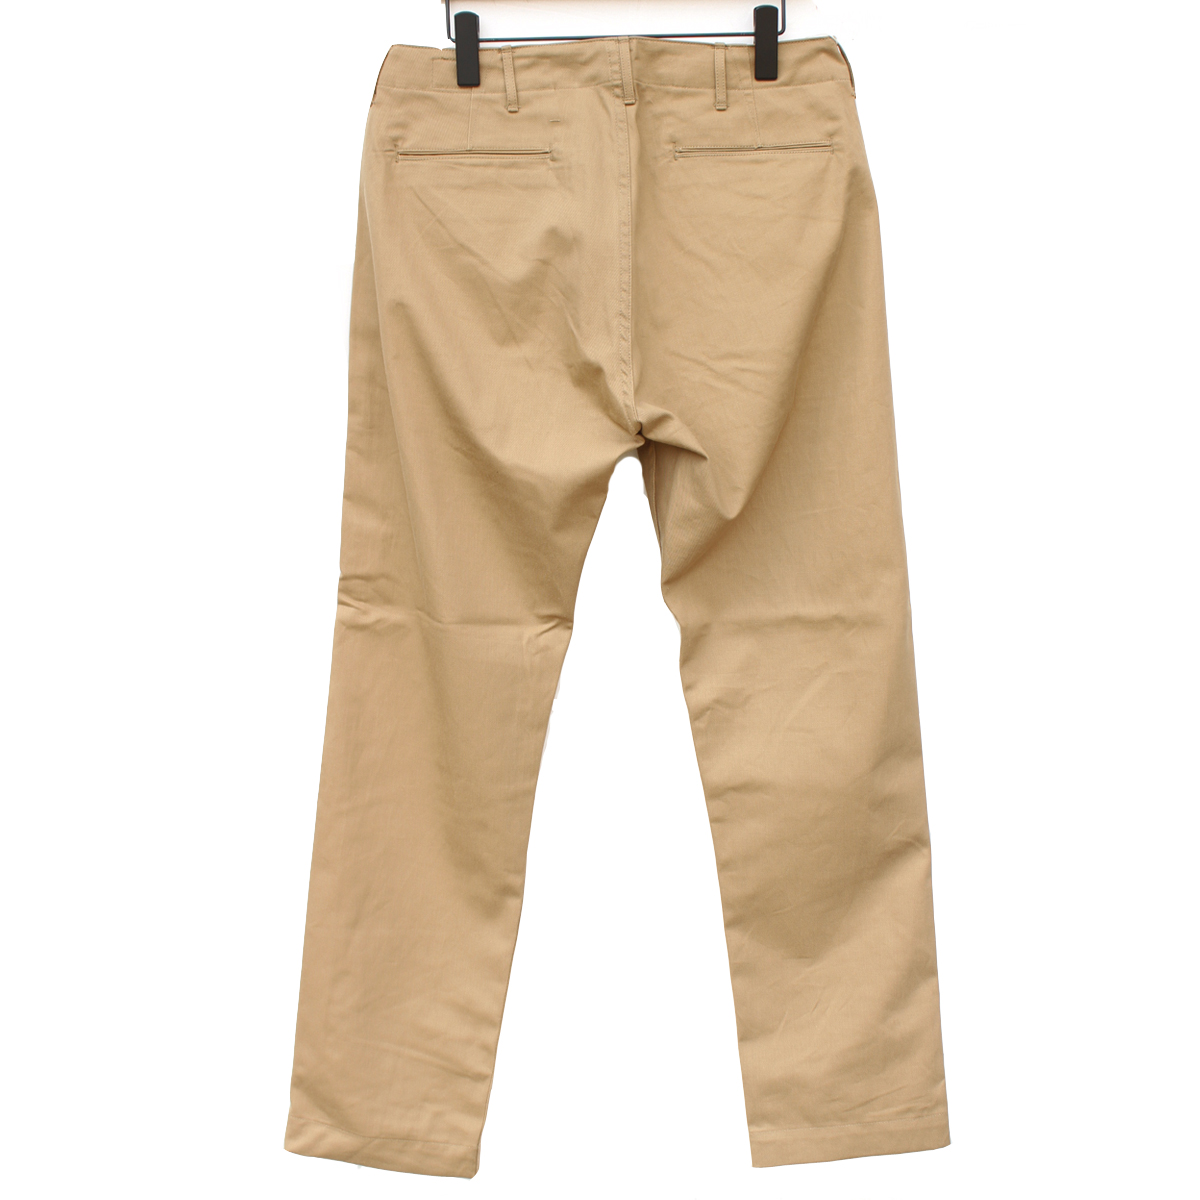 orSlow Slim Fit Army Trouser | PAVEMENT